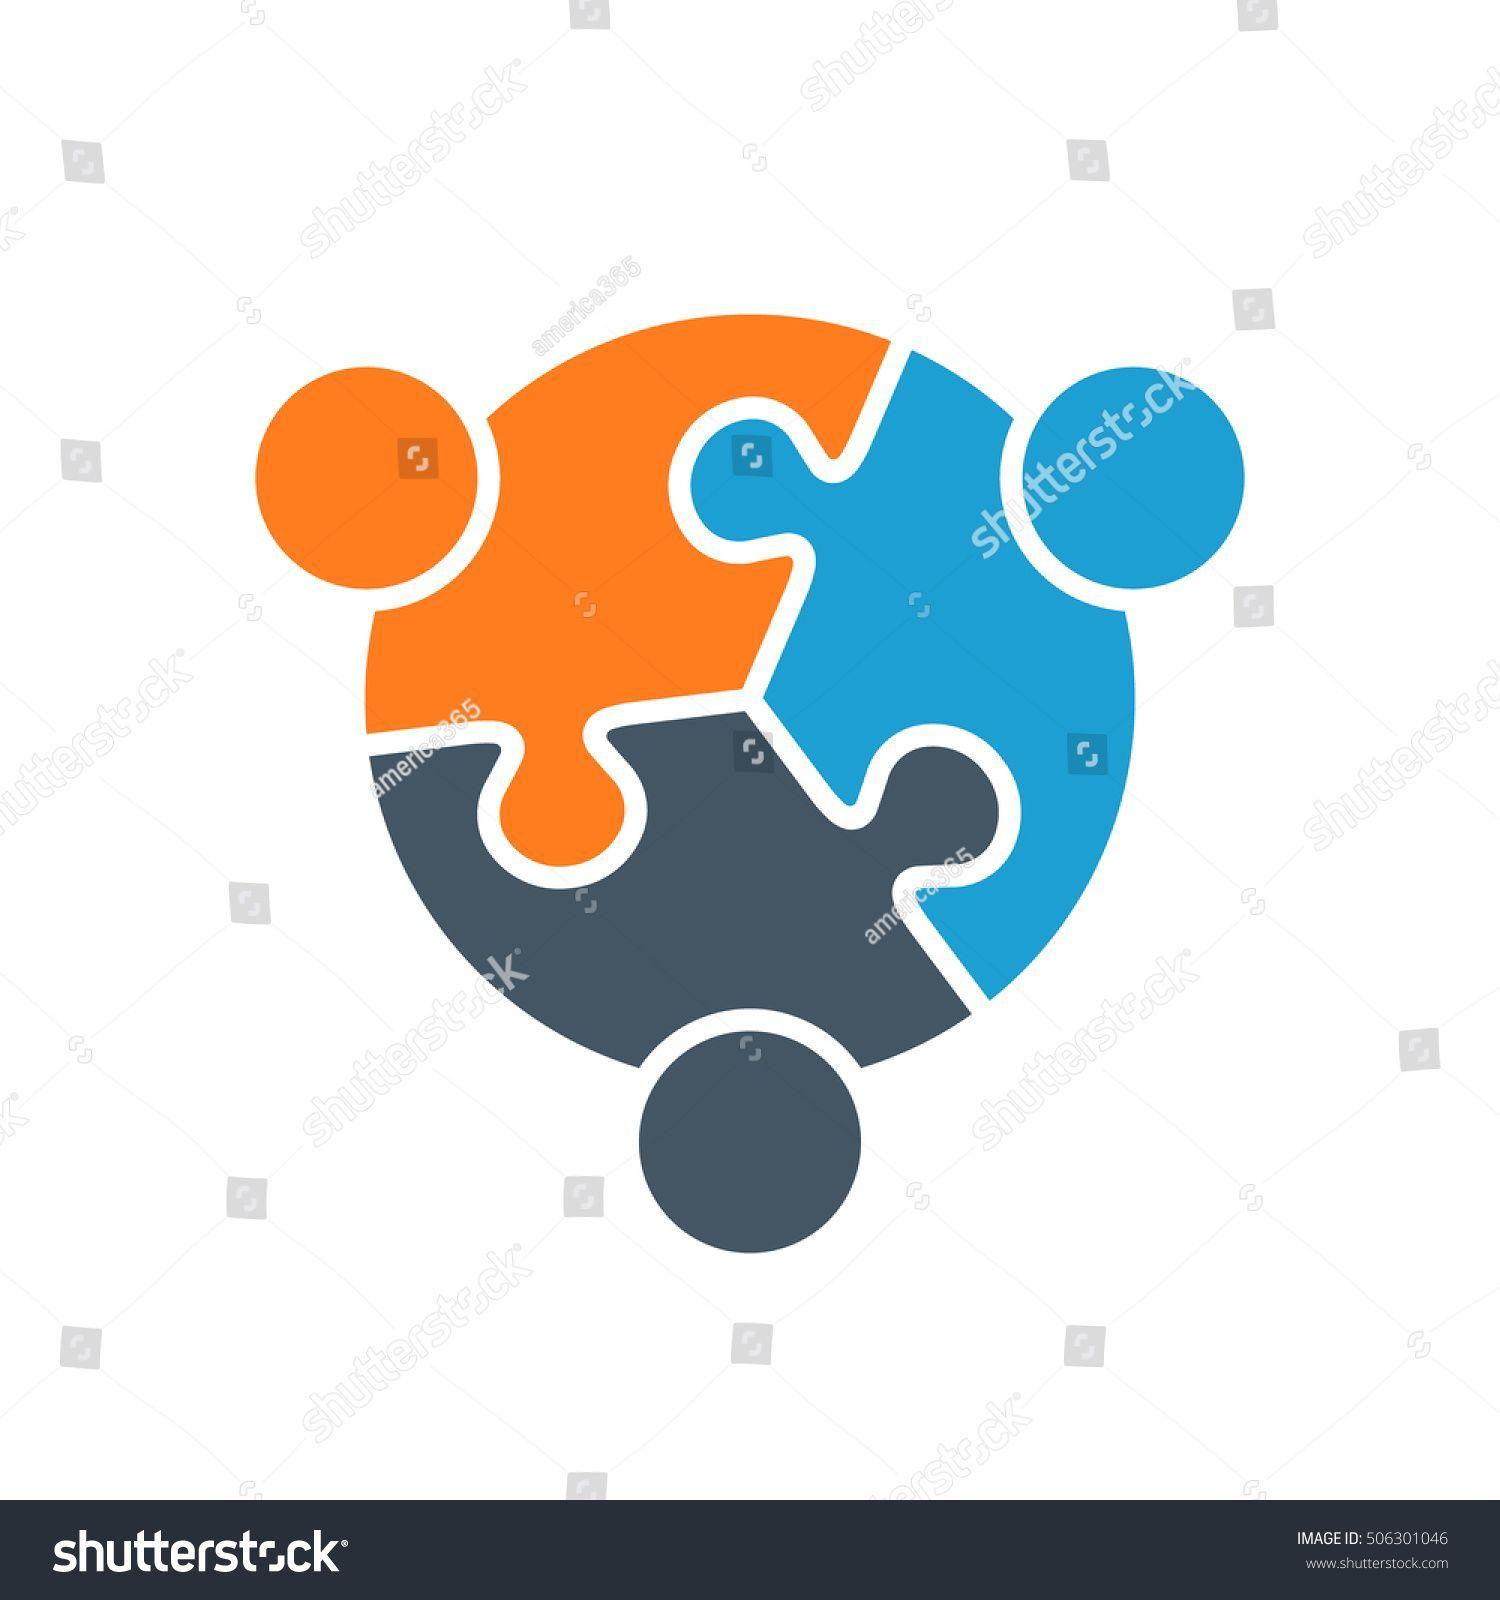 3 Person Logo - Vector Puzzle Family of 3 #team #people #business #teamwork #group ...